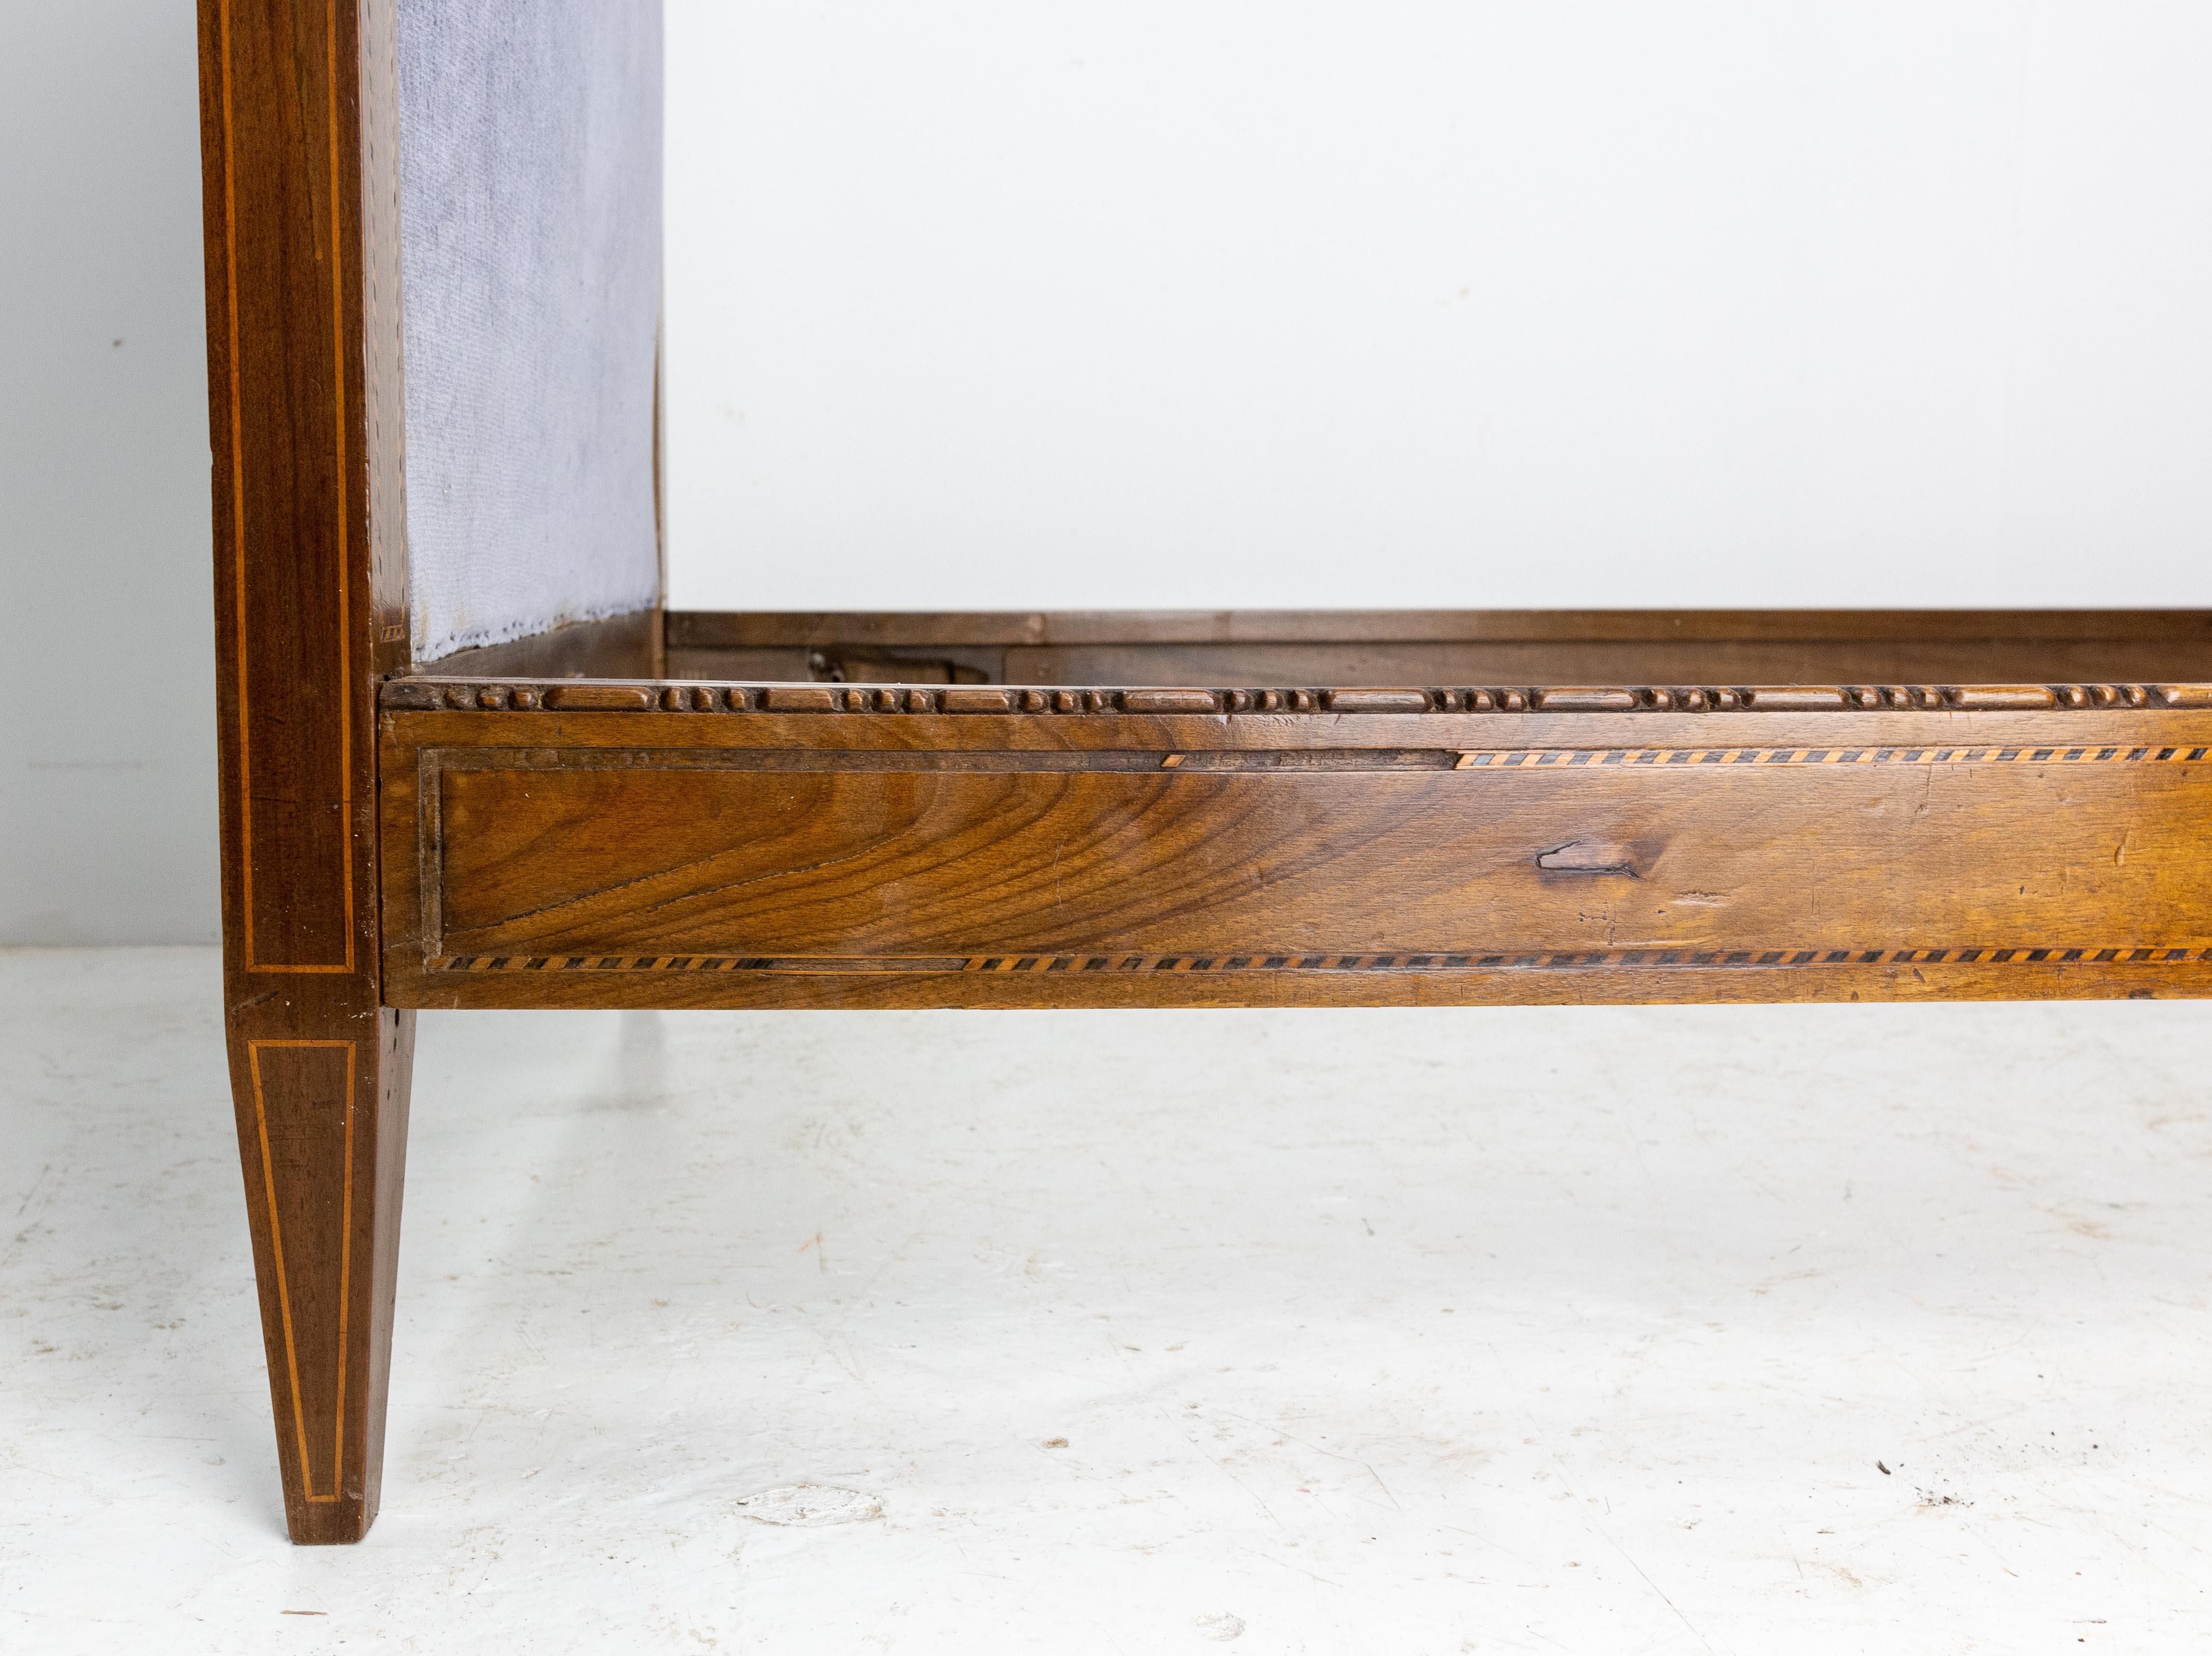 French Directoire walnut Sofa Banquette Carved and Inlayed, Early 19th Century For Sale 7